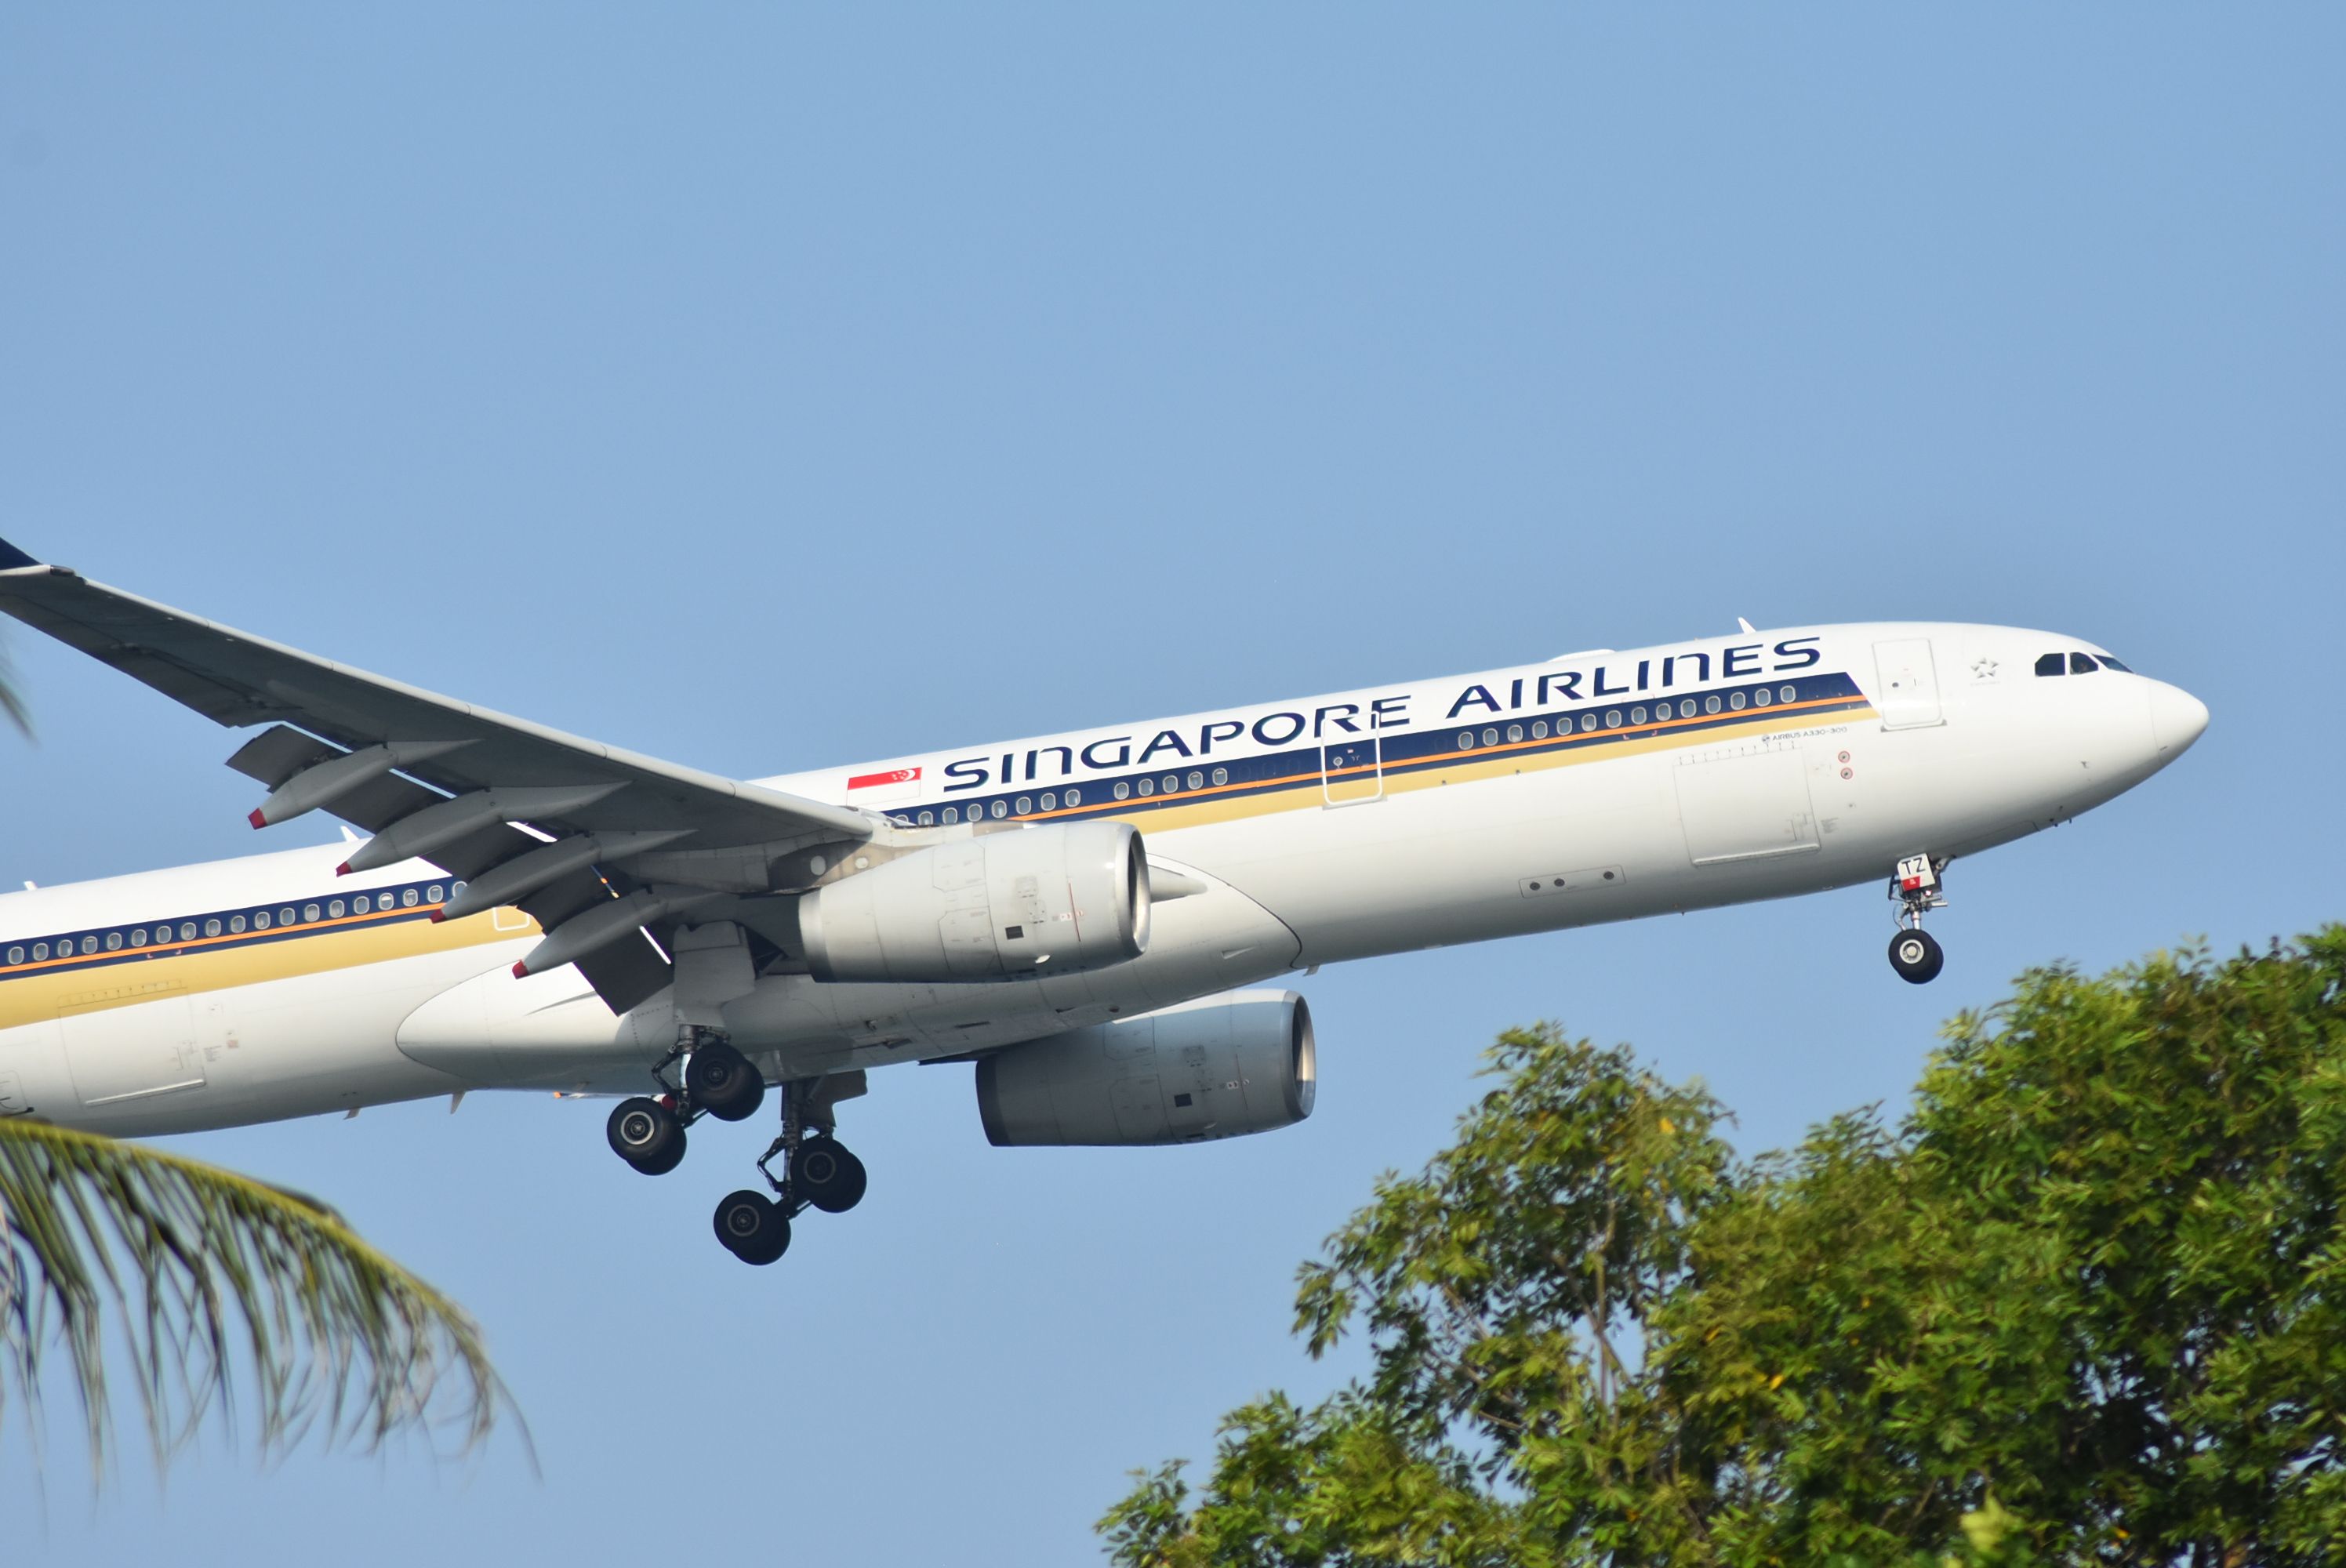 Airbus A330-300 (9V-STZ) - Arrival, Singapore Airlines, RWY 20R, Changi, Singapore. 8 Sep 2019